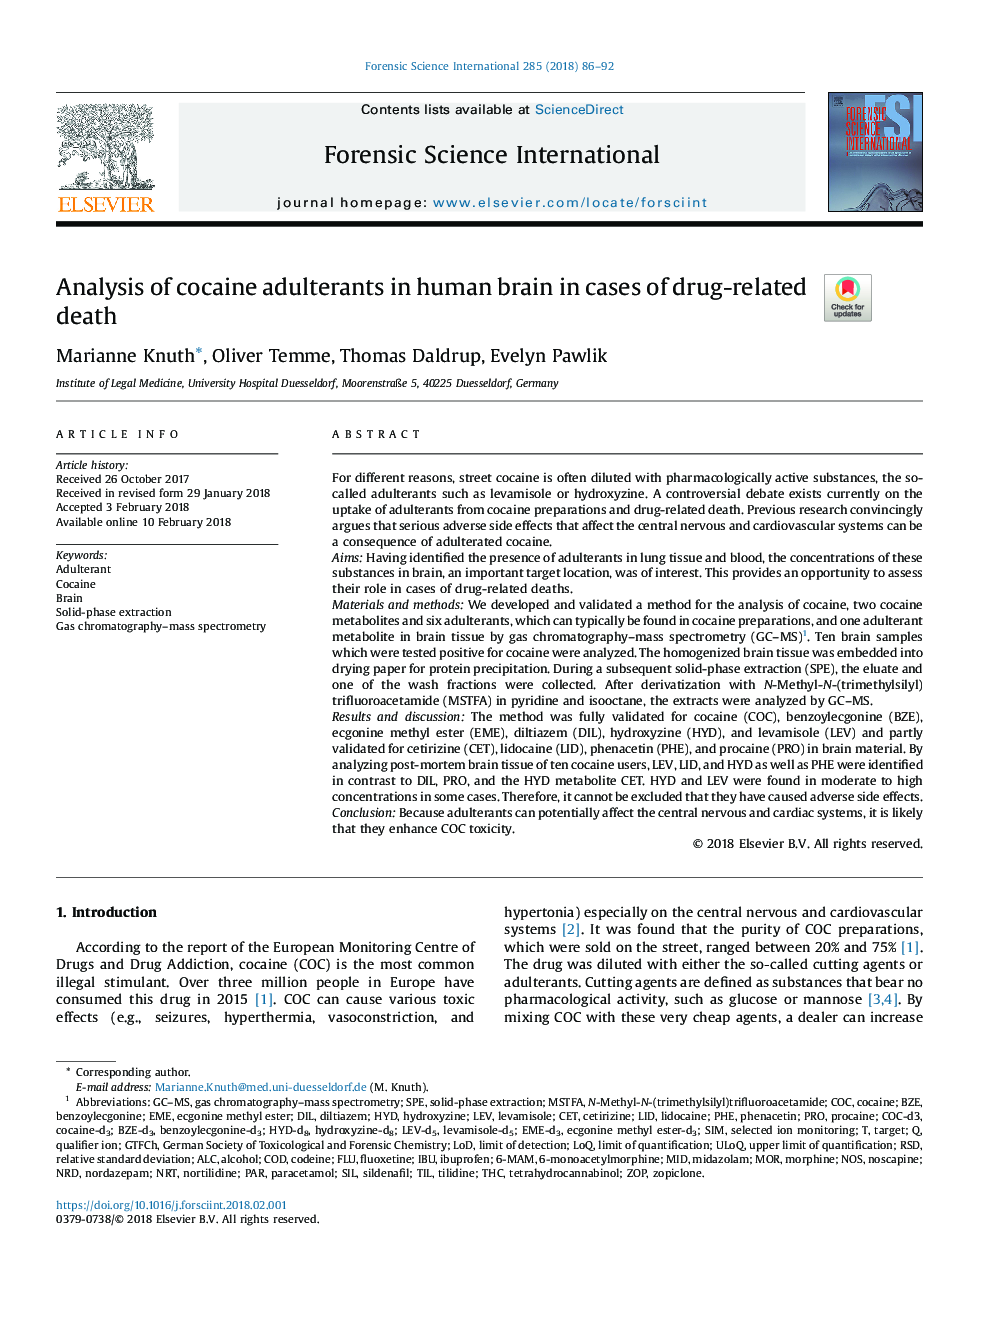 Analysis of cocaine adulterants in human brain in cases of drug-related death